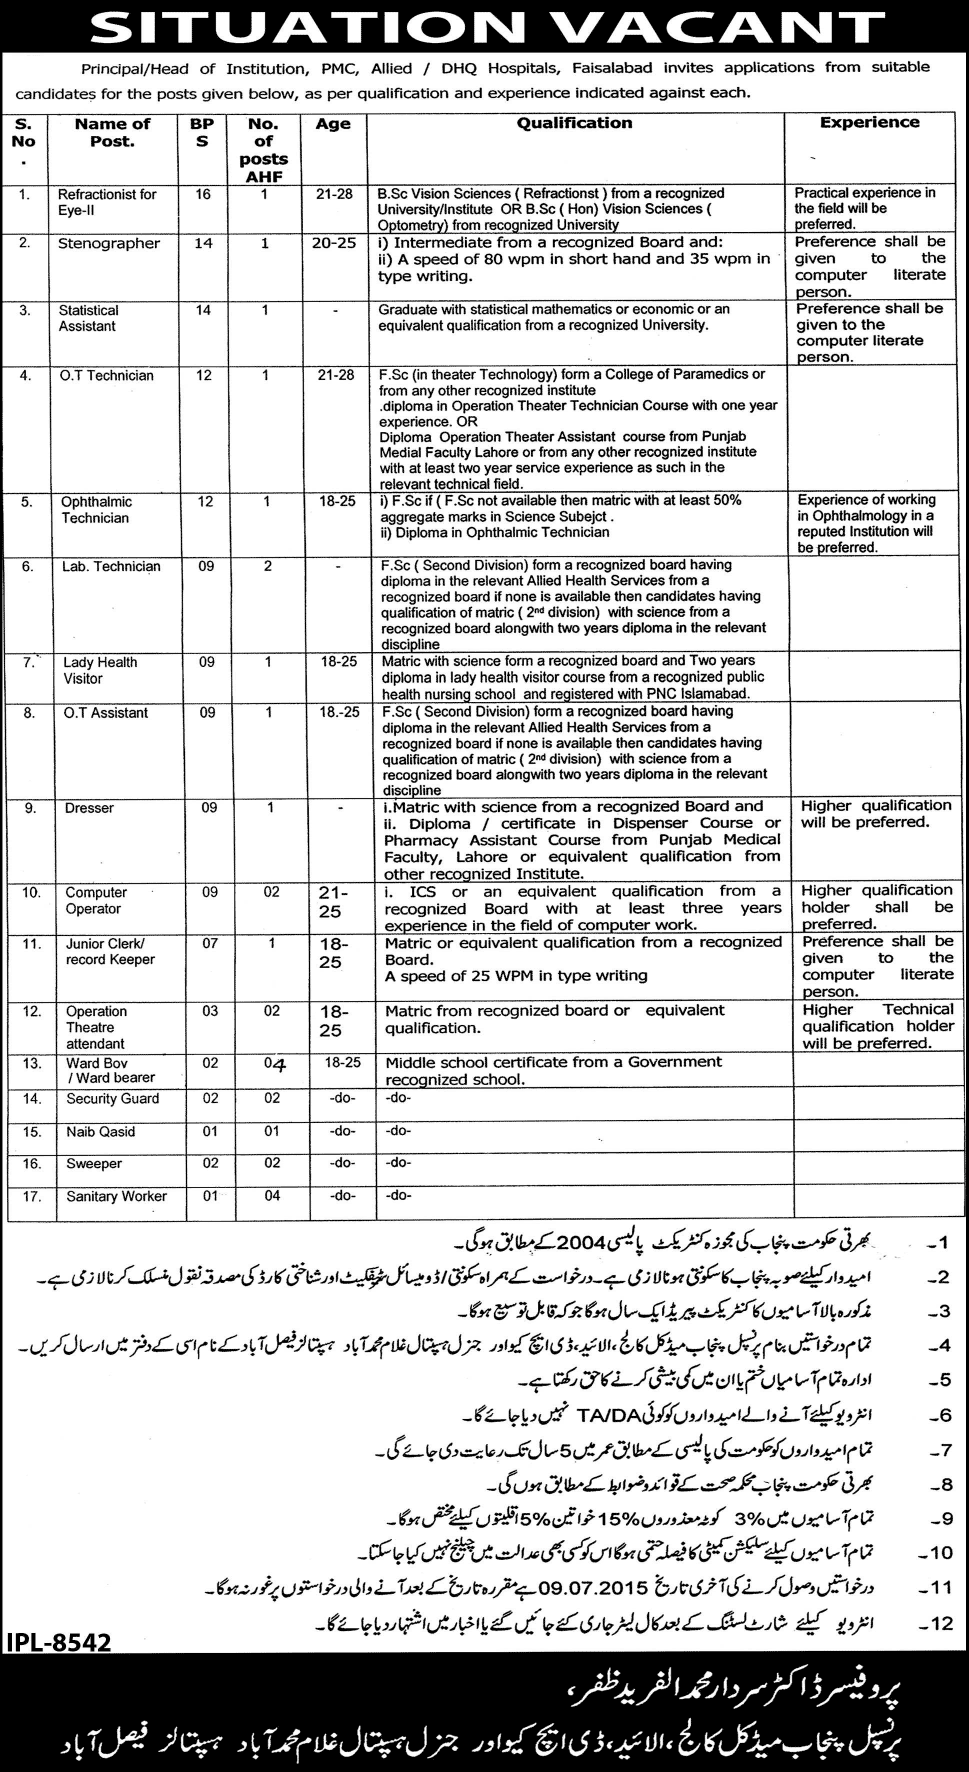 PMC, Allied, DHQ & General Hospital Faisalabad Jobs 2015 June / July Latest